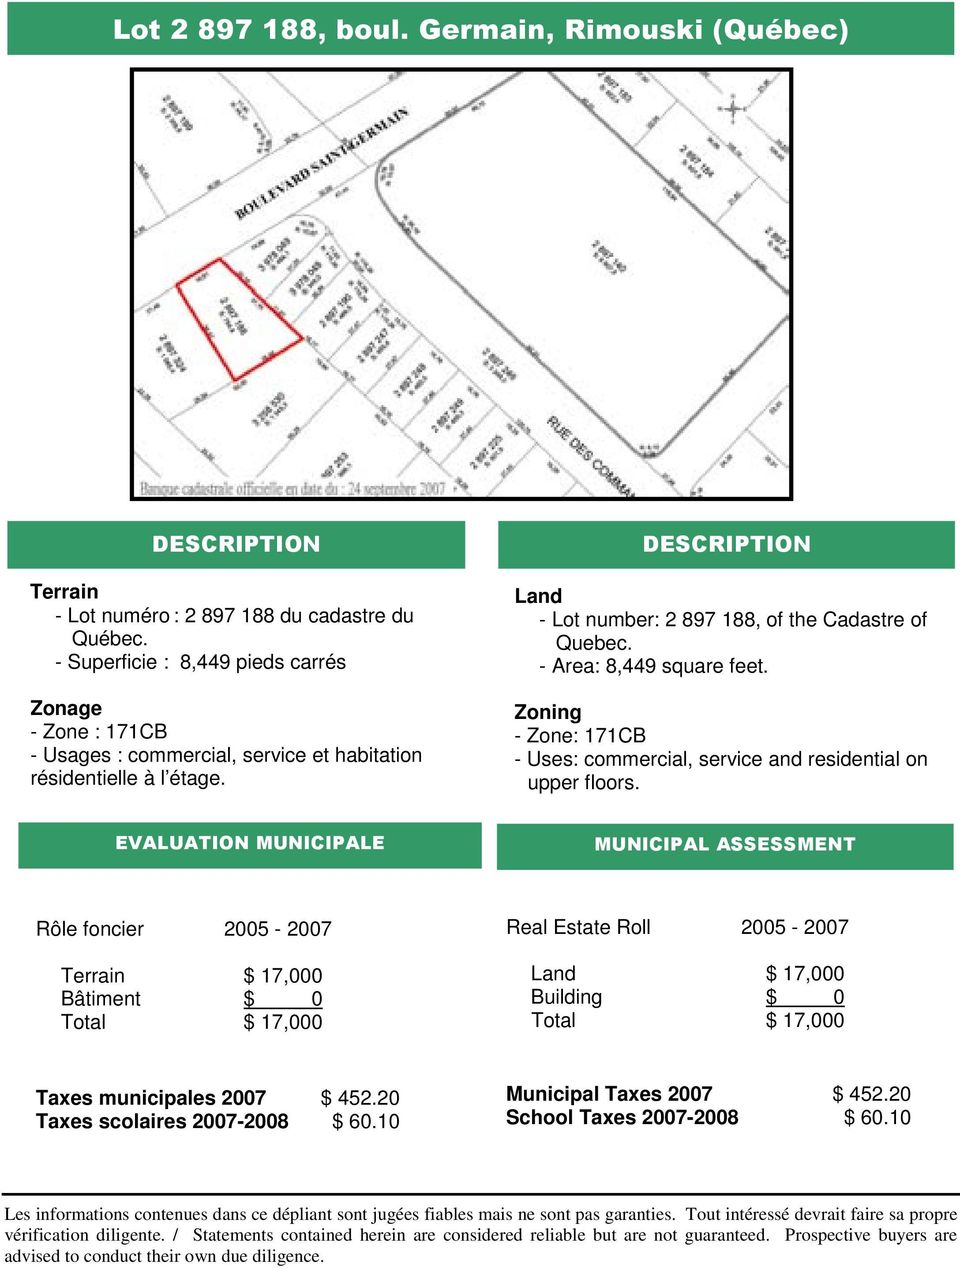 DESCRIPTION Land - Lot number: 2 897 188, of the Cadastre of Quebec. - Area: 8,449 square feet. Zoning - Zone: 171CB - Uses: commercial, service and residential on upper floors.